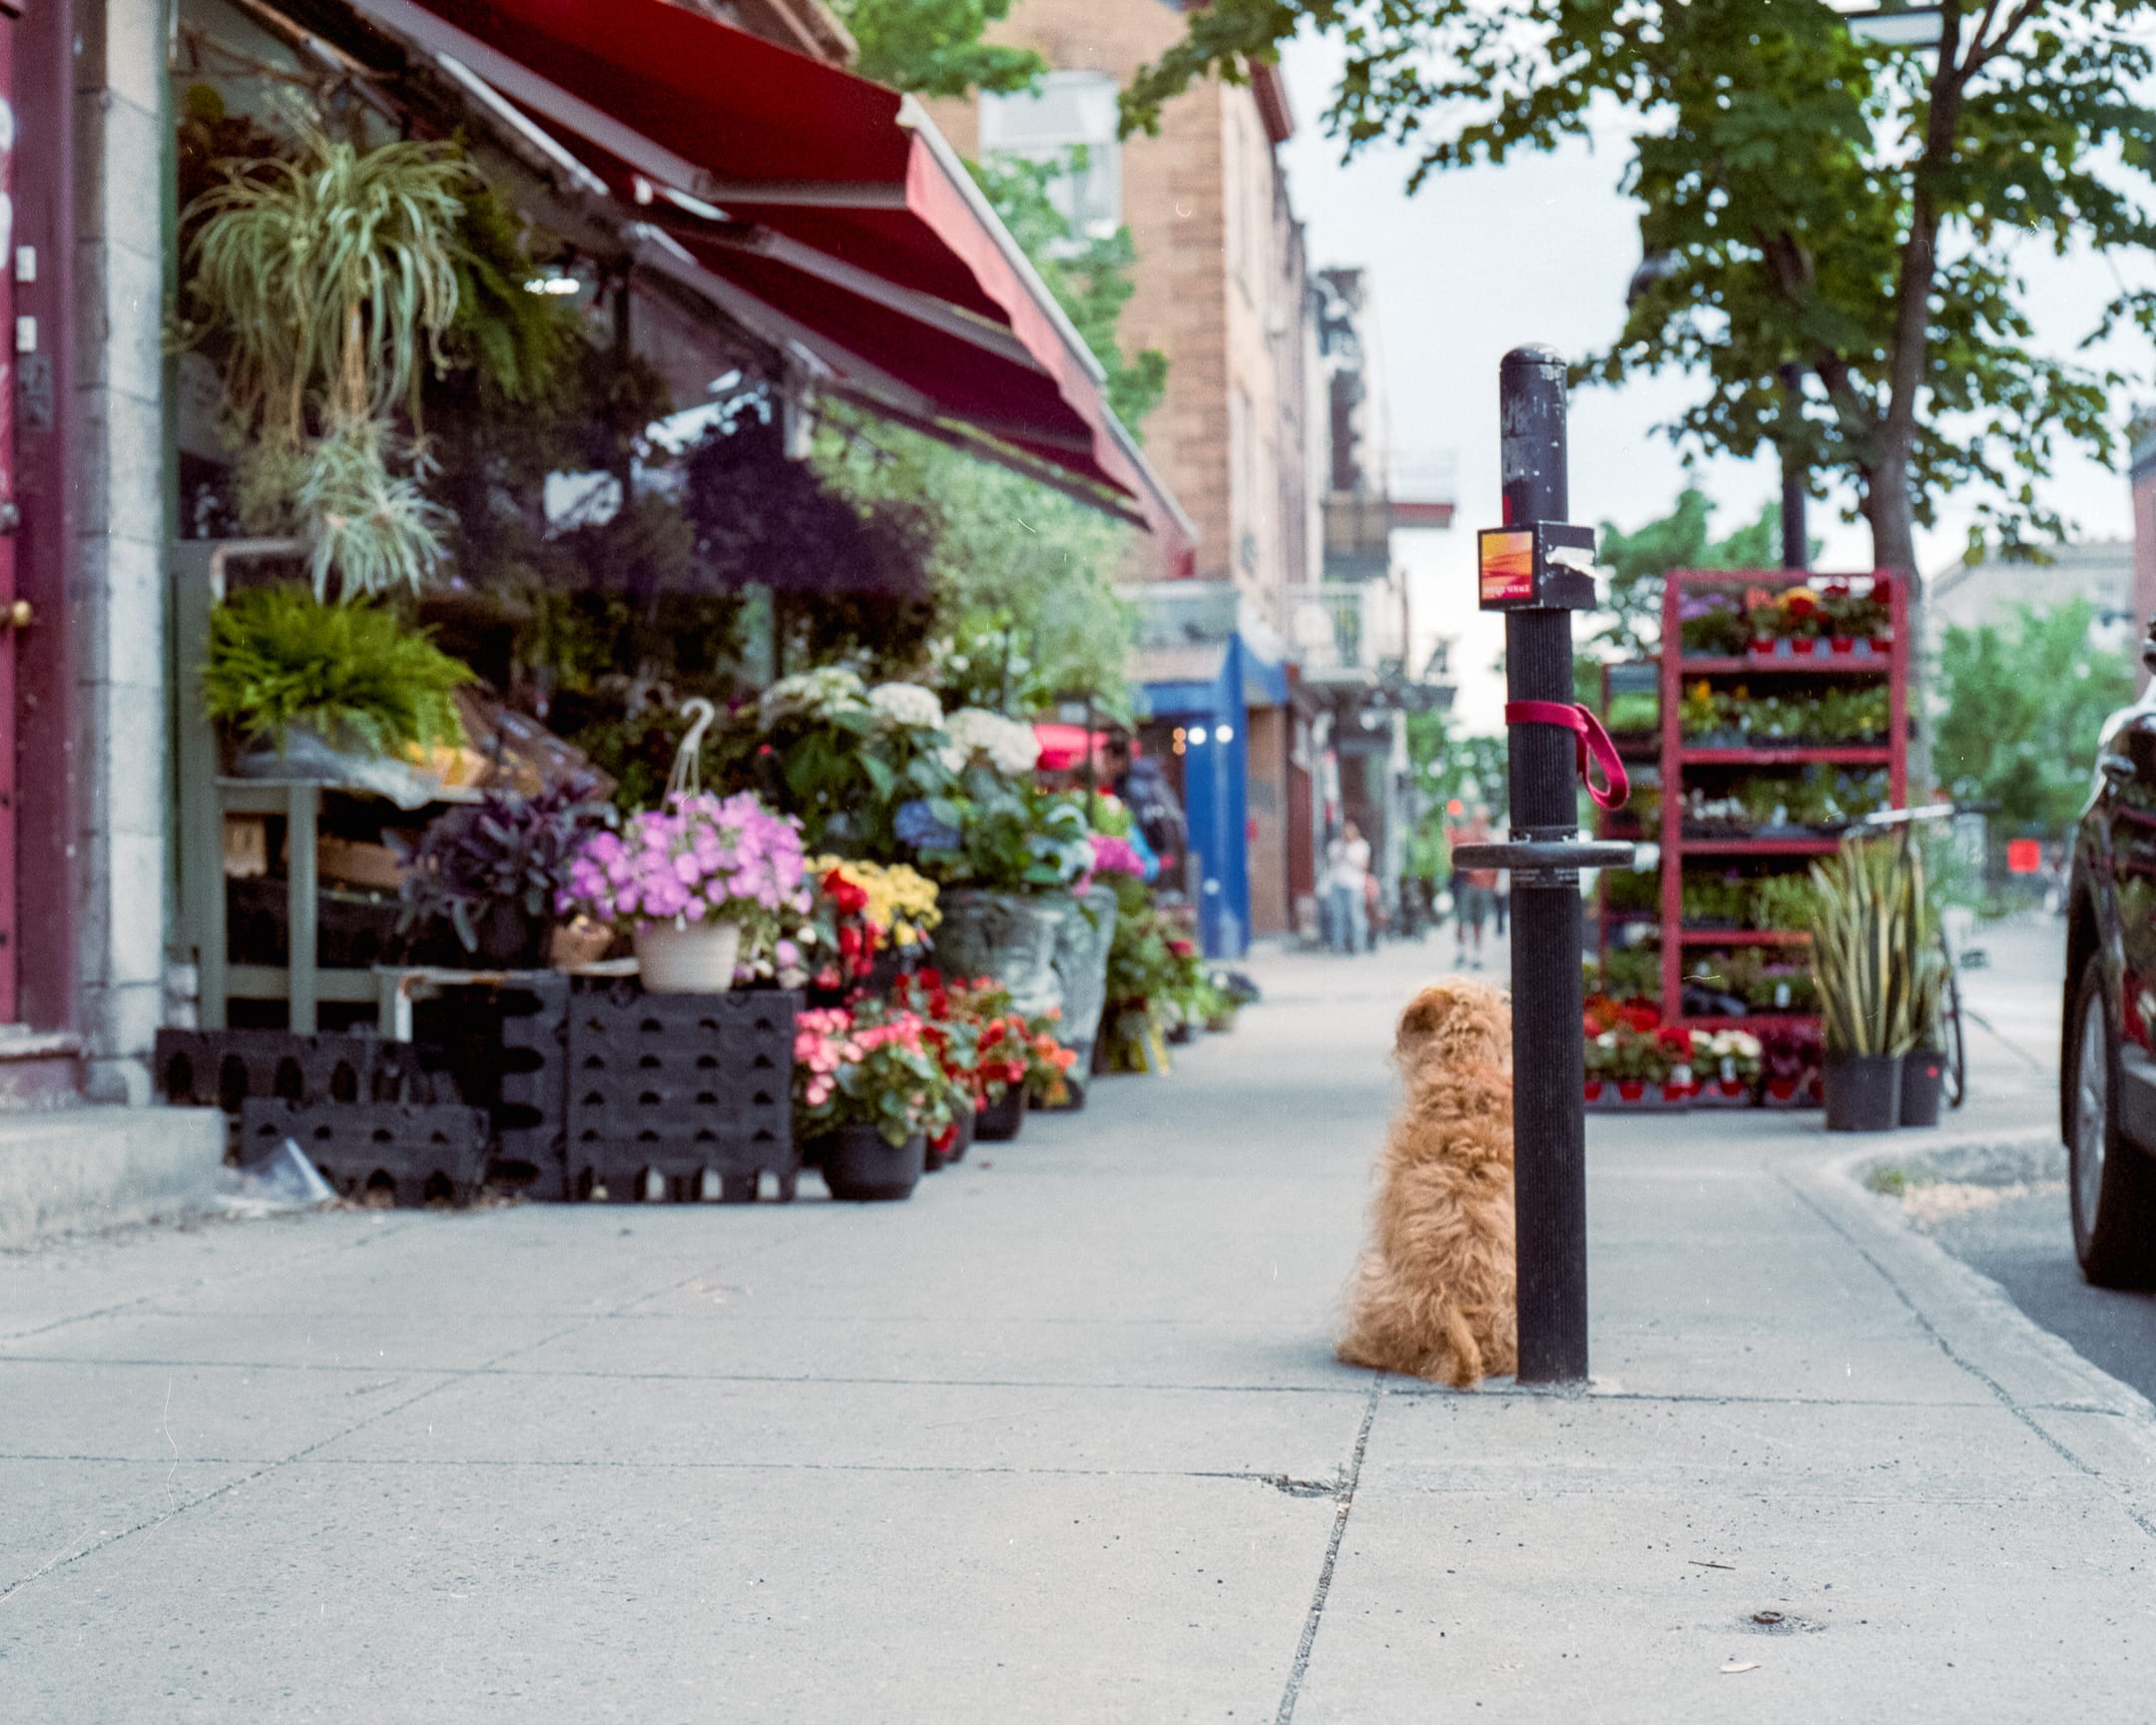 A dog tied to a parking meter waiting for his owner outside of a produce store